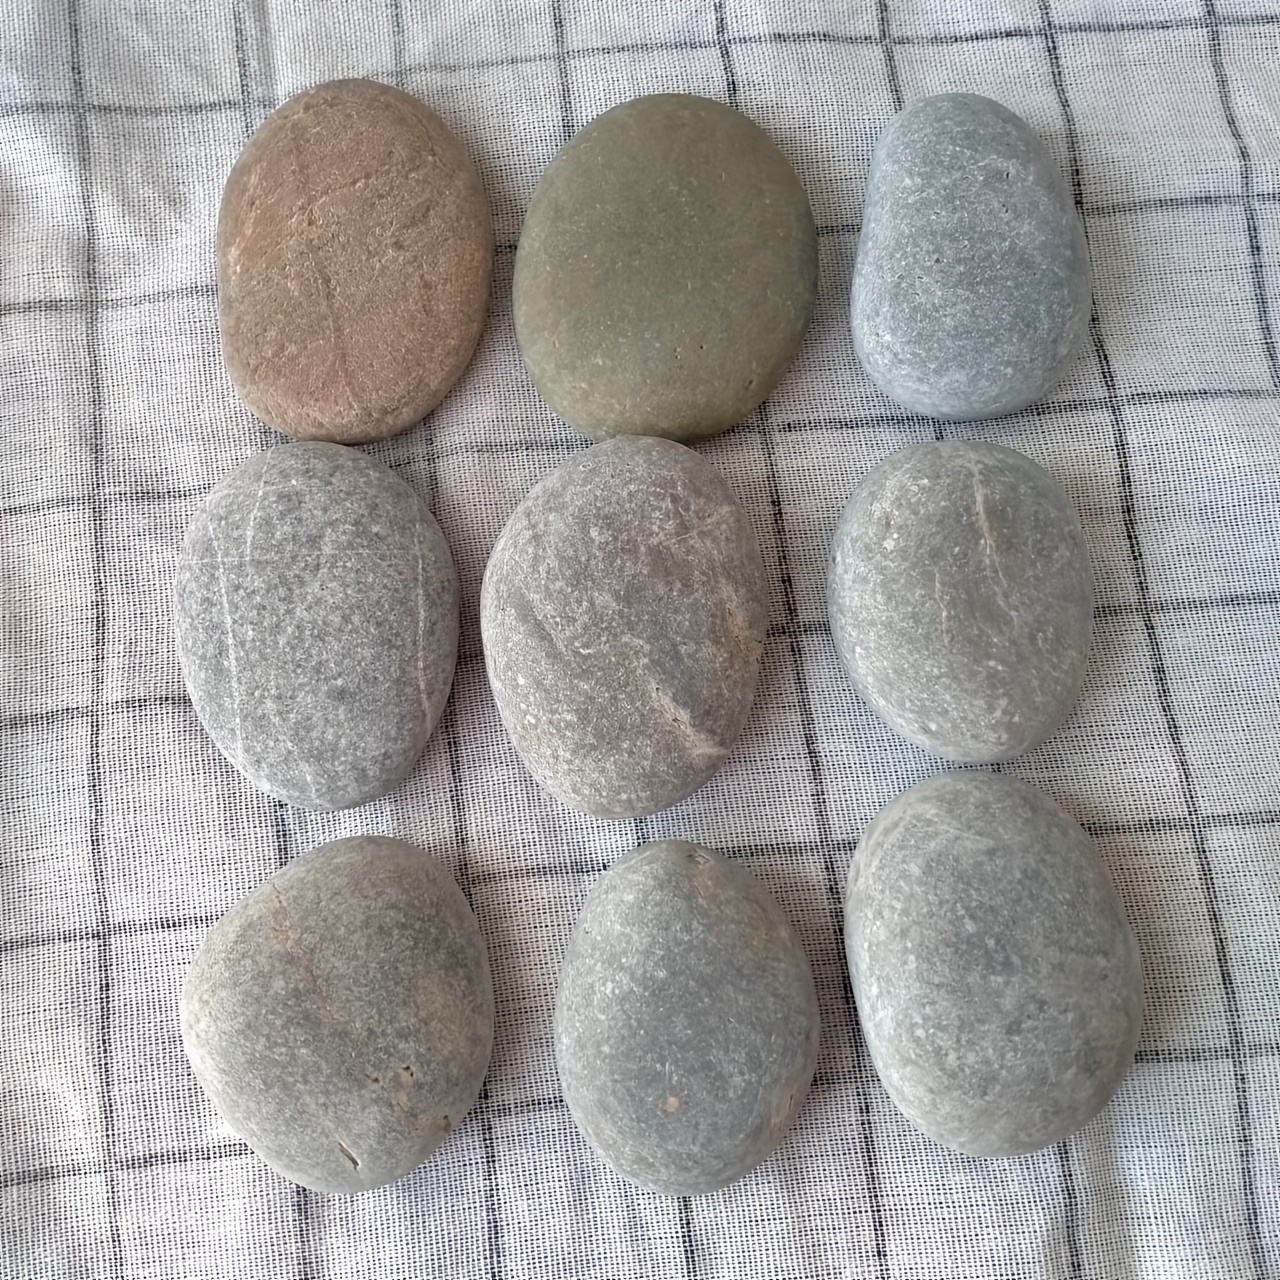 River Rocks for Painting, Painting Rocks Bulk for Adults, Craft